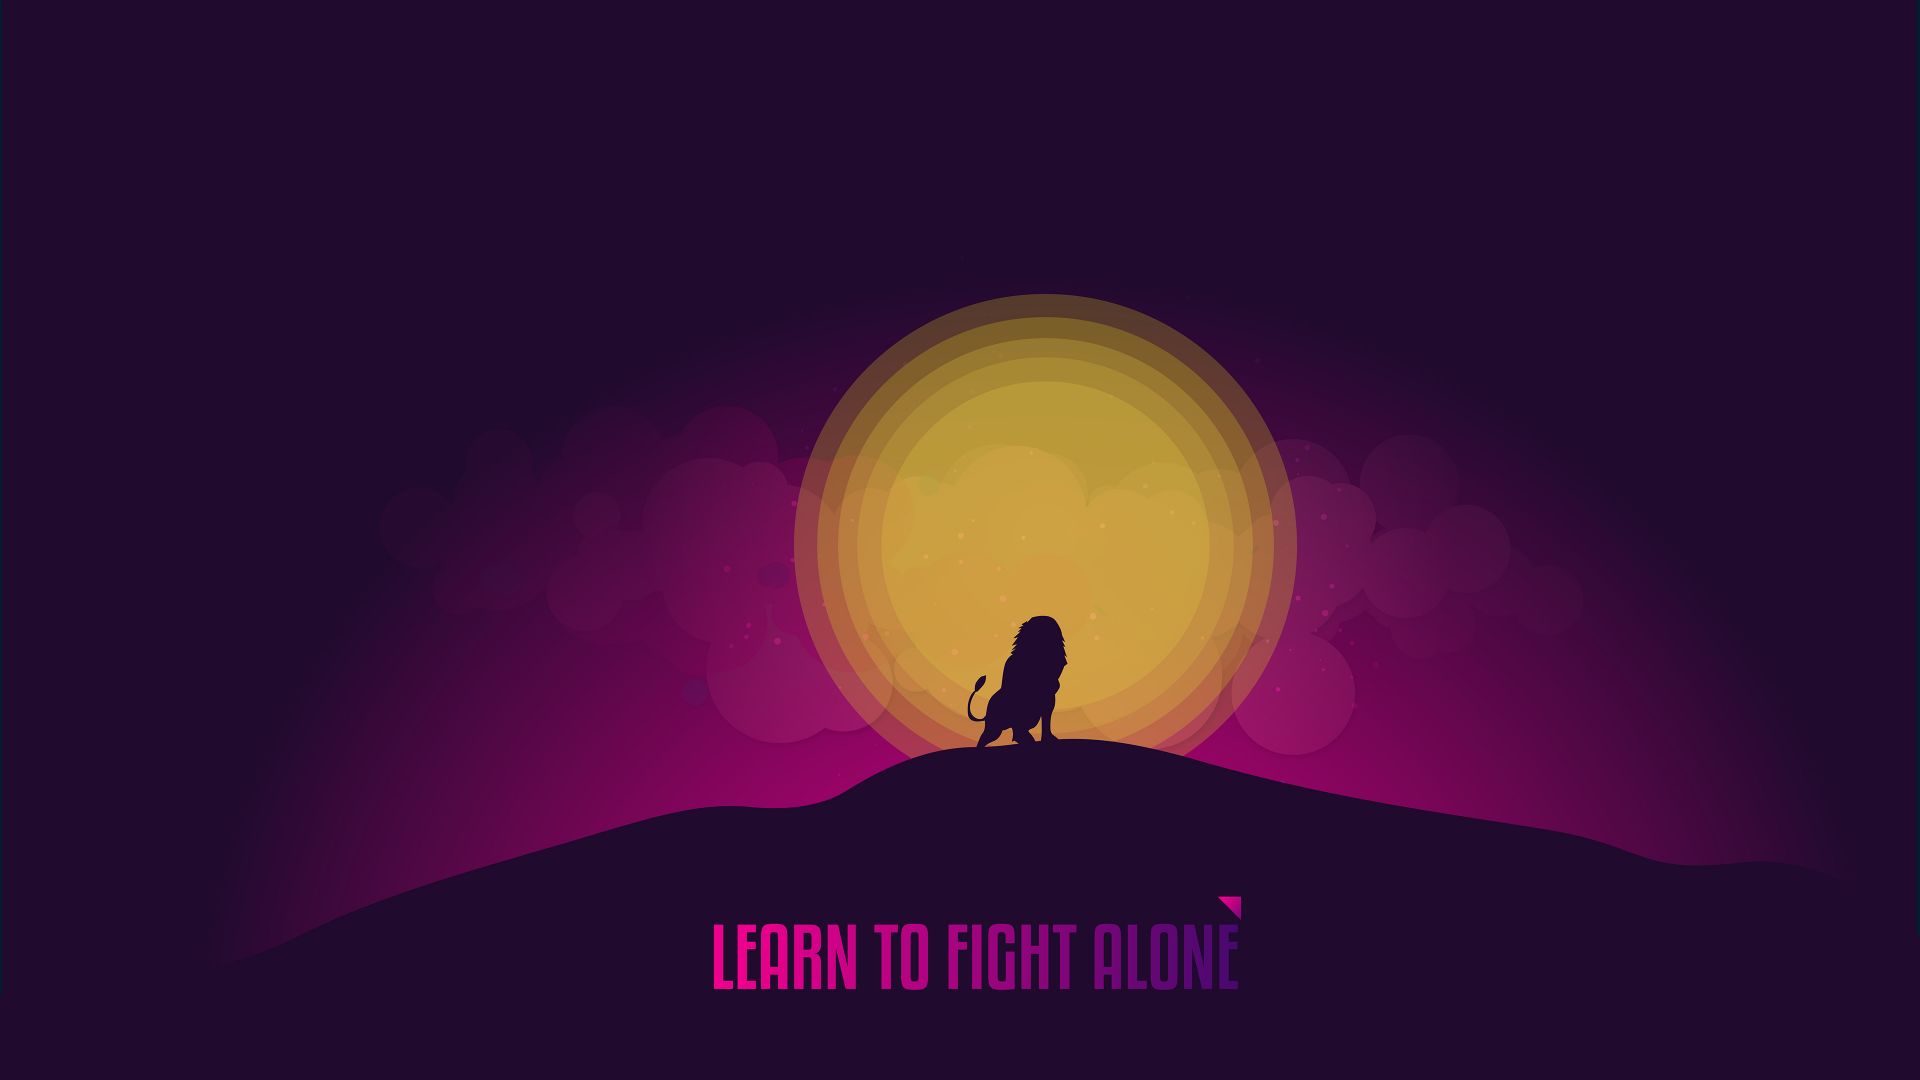 Wallpaper Learn to fight alone, minimal, quote